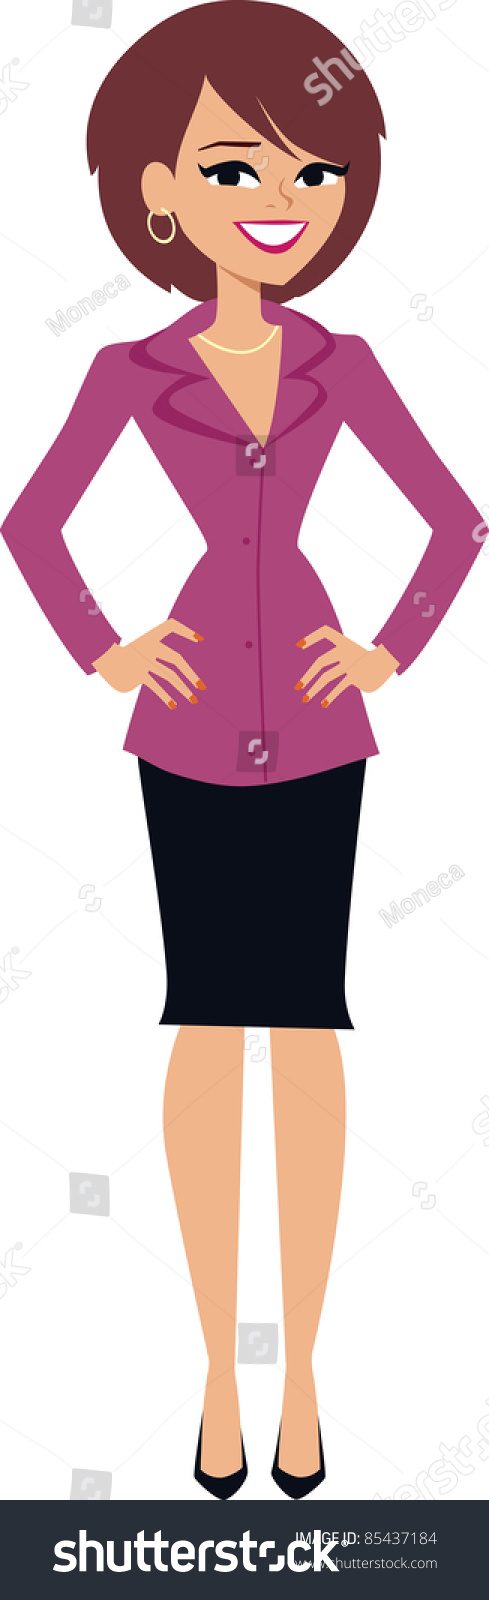 clipart women's clothing - photo #37